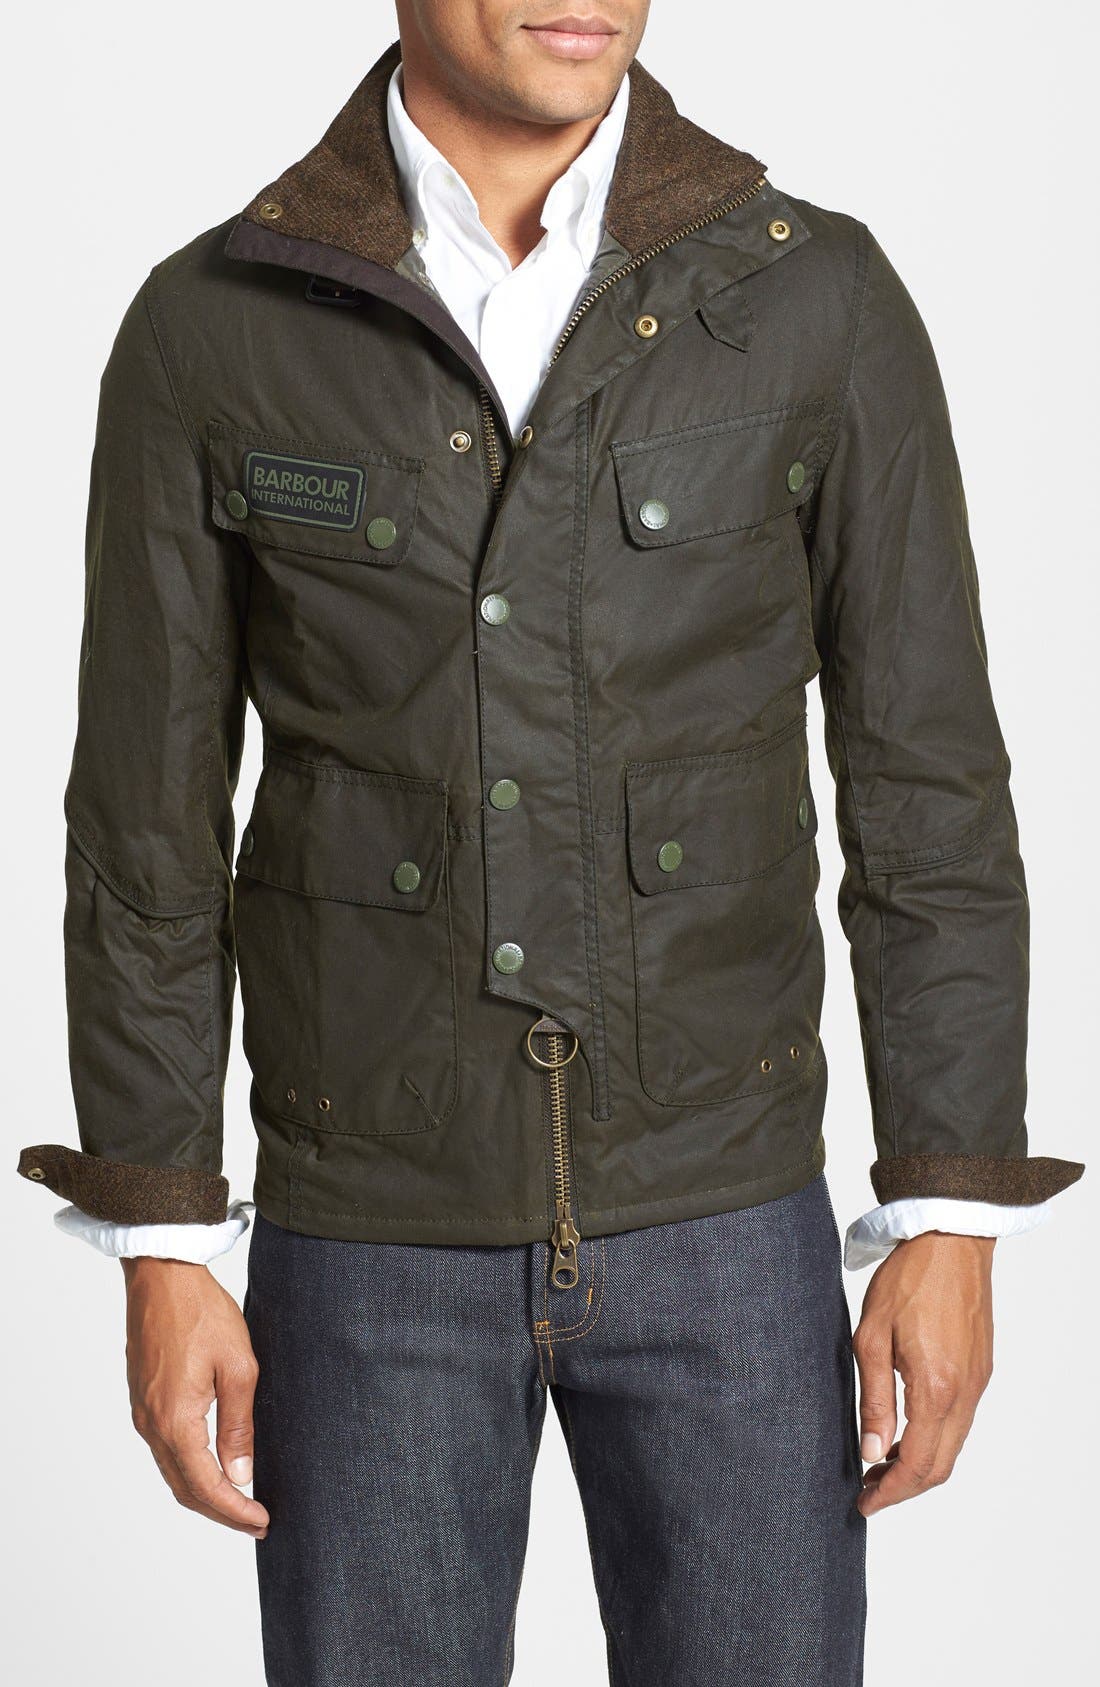 Barbour 'Trail' Slim Fit Waxed Jacket 